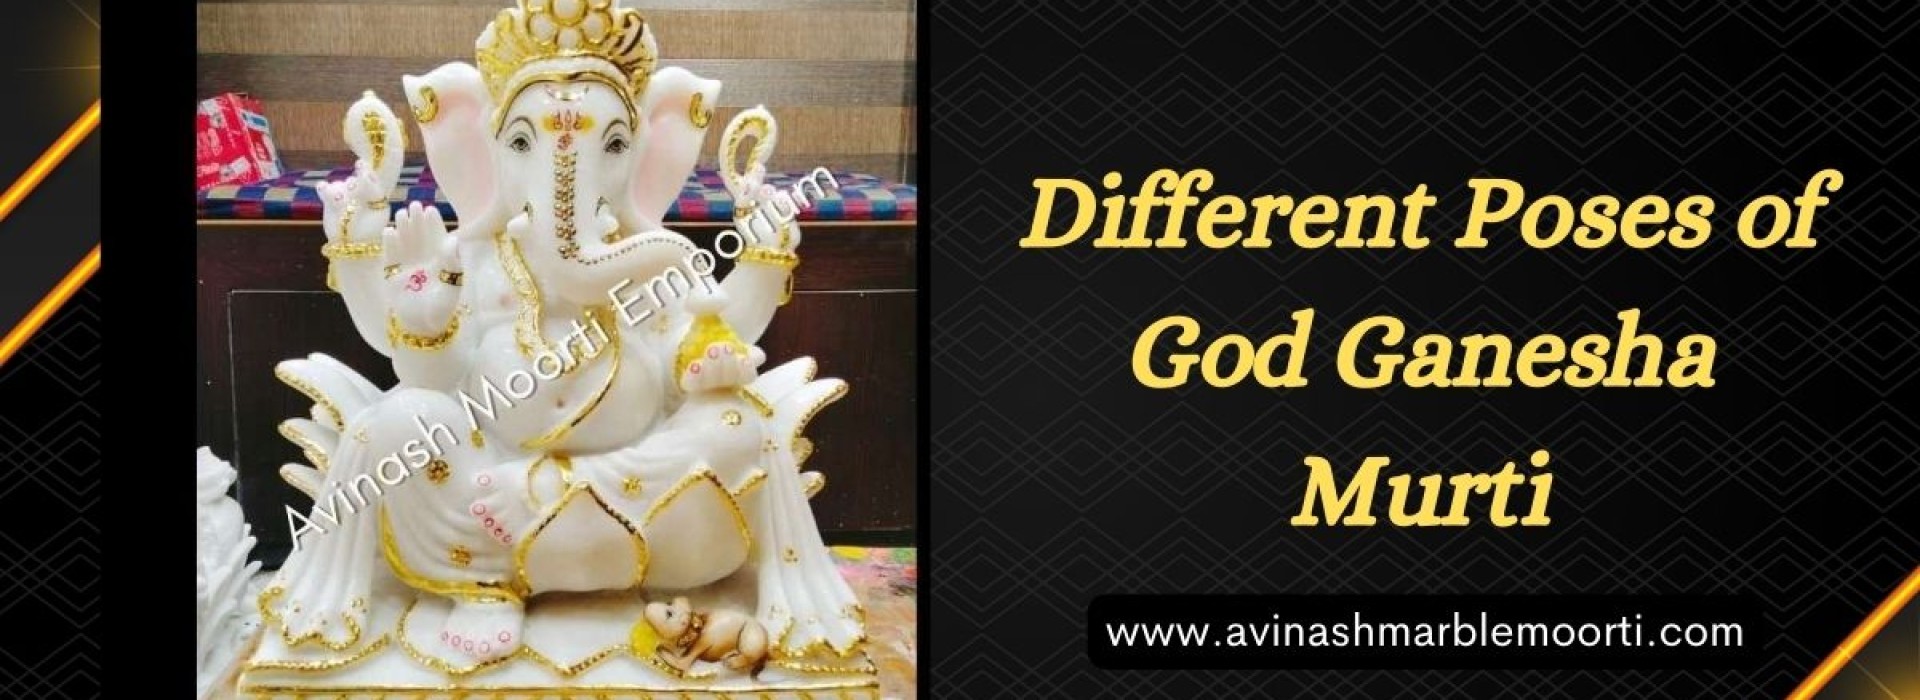 High Quality Photo Of Lord Ganesha In Side View Rendered In 3d Illustration  Background, Puja, Puja Background, Lord Ganesha Background Image And  Wallpaper for Free Download